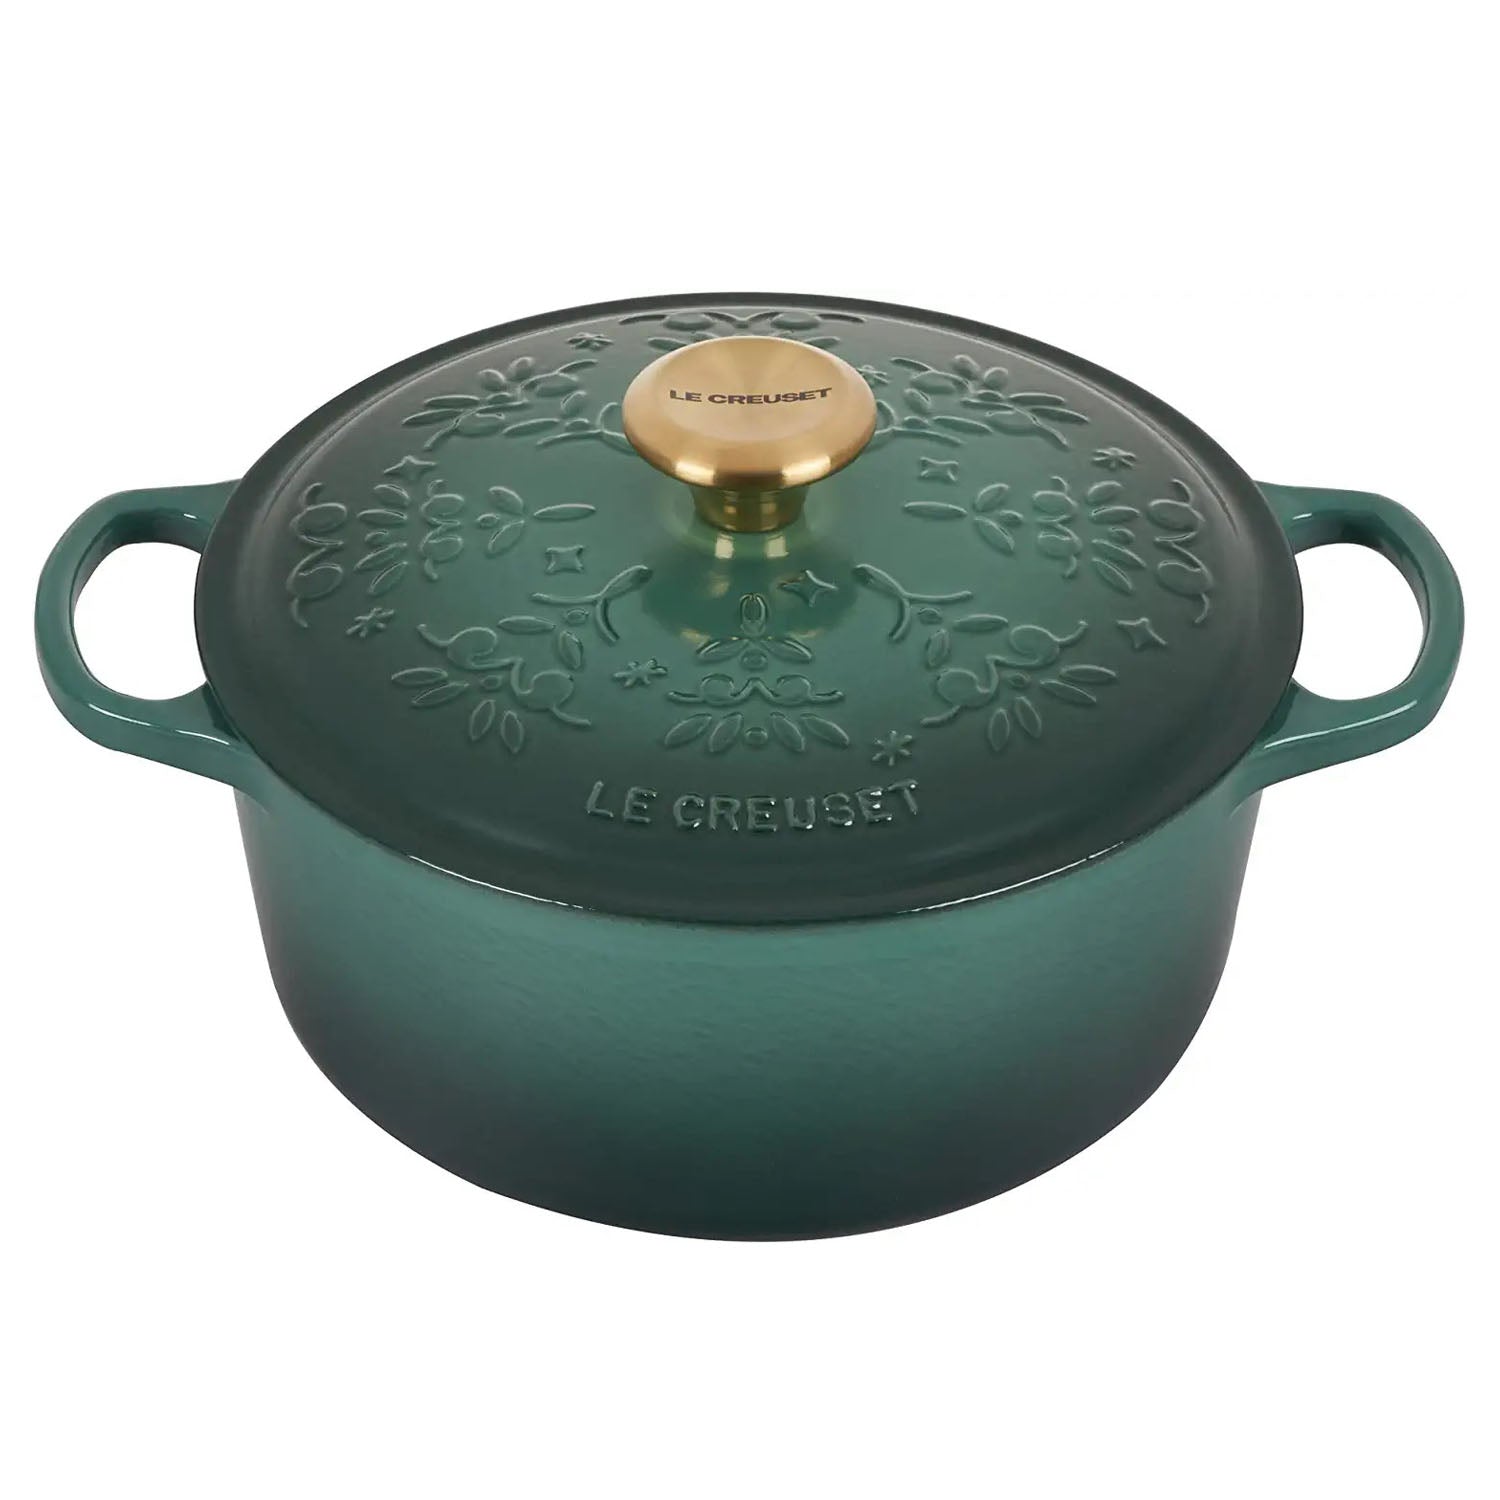 Le Creuset - Introducing the Gold Knob collection, available exclusively at Le  Creuset Signature Boutiques and at lecreuset.com